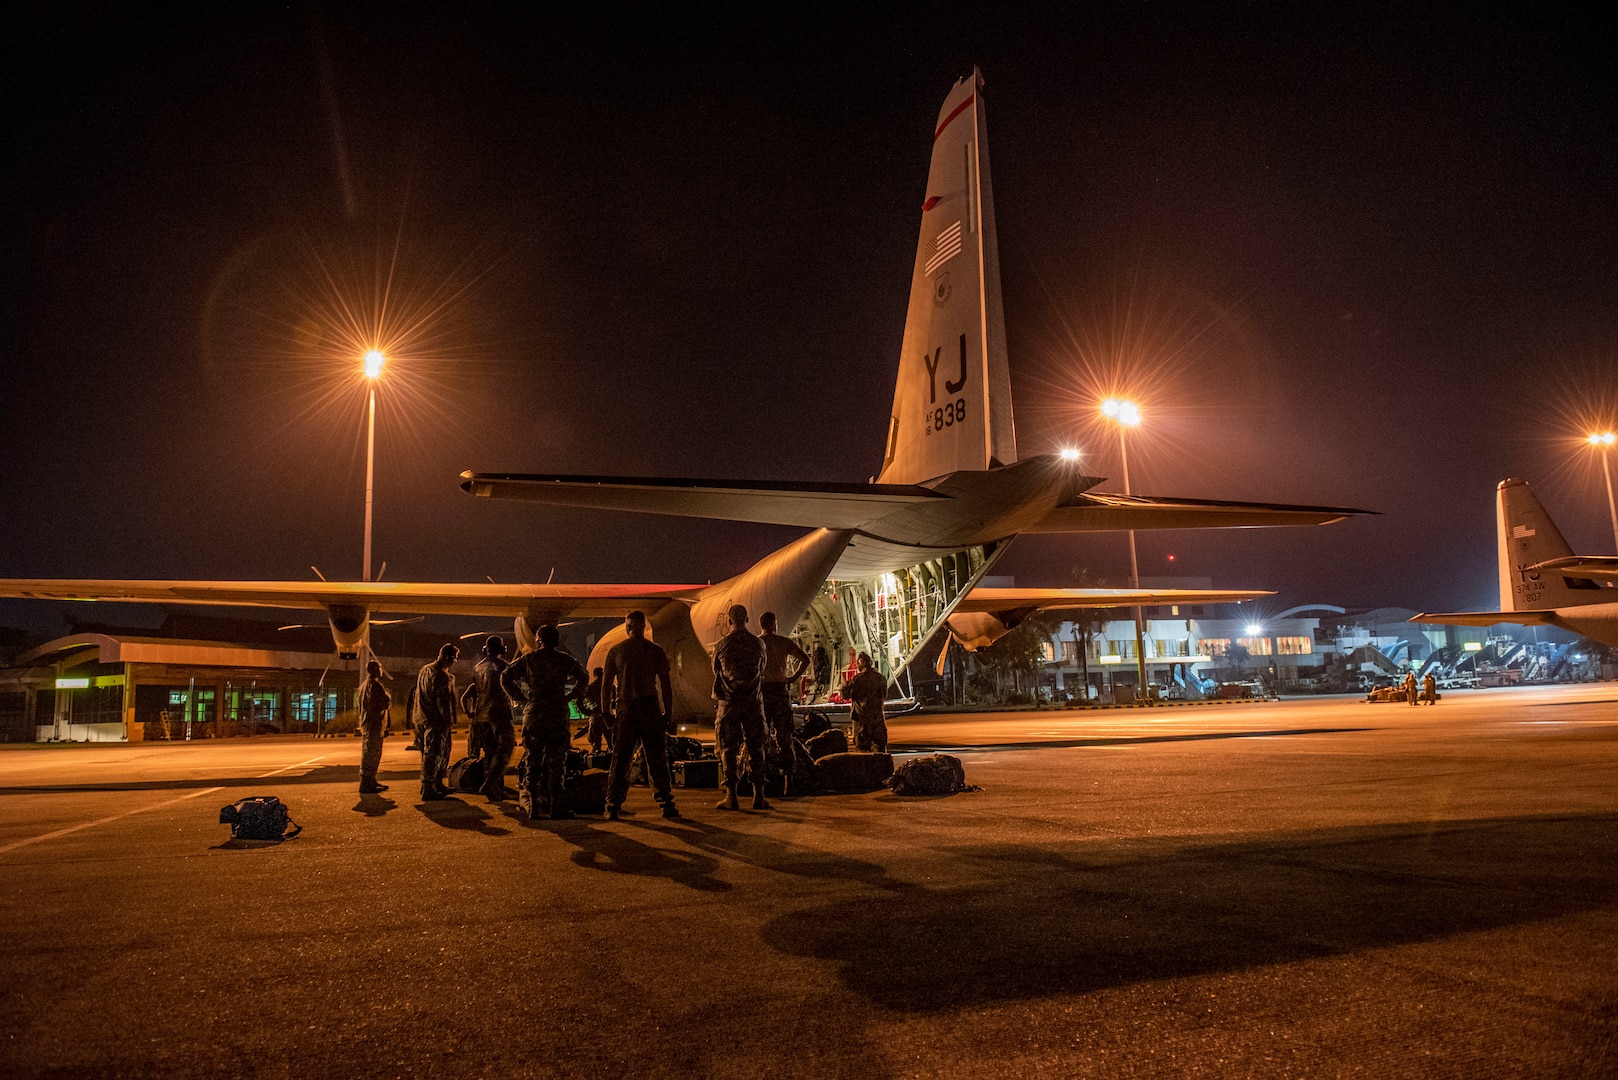 U.S. Air Force members assigned to the 36th Contingency Response Group Andersen Air Force Base, Guam, three C-130J Super Hercules aircraft and aircrew from the 374th Airlift Wing, Yokota Air Base, Japan arrive at Balikpapan, Indonesia Oct. 5, 2018. Members are supporting USAID’s humanitarian relief efforts after a 7.5 magnitude earthquake and tsunami struck Indonesia’s Sulawesi Island Sept. 28, 2018. (U.S. Air Force photo by Master Sgt. JT May III)